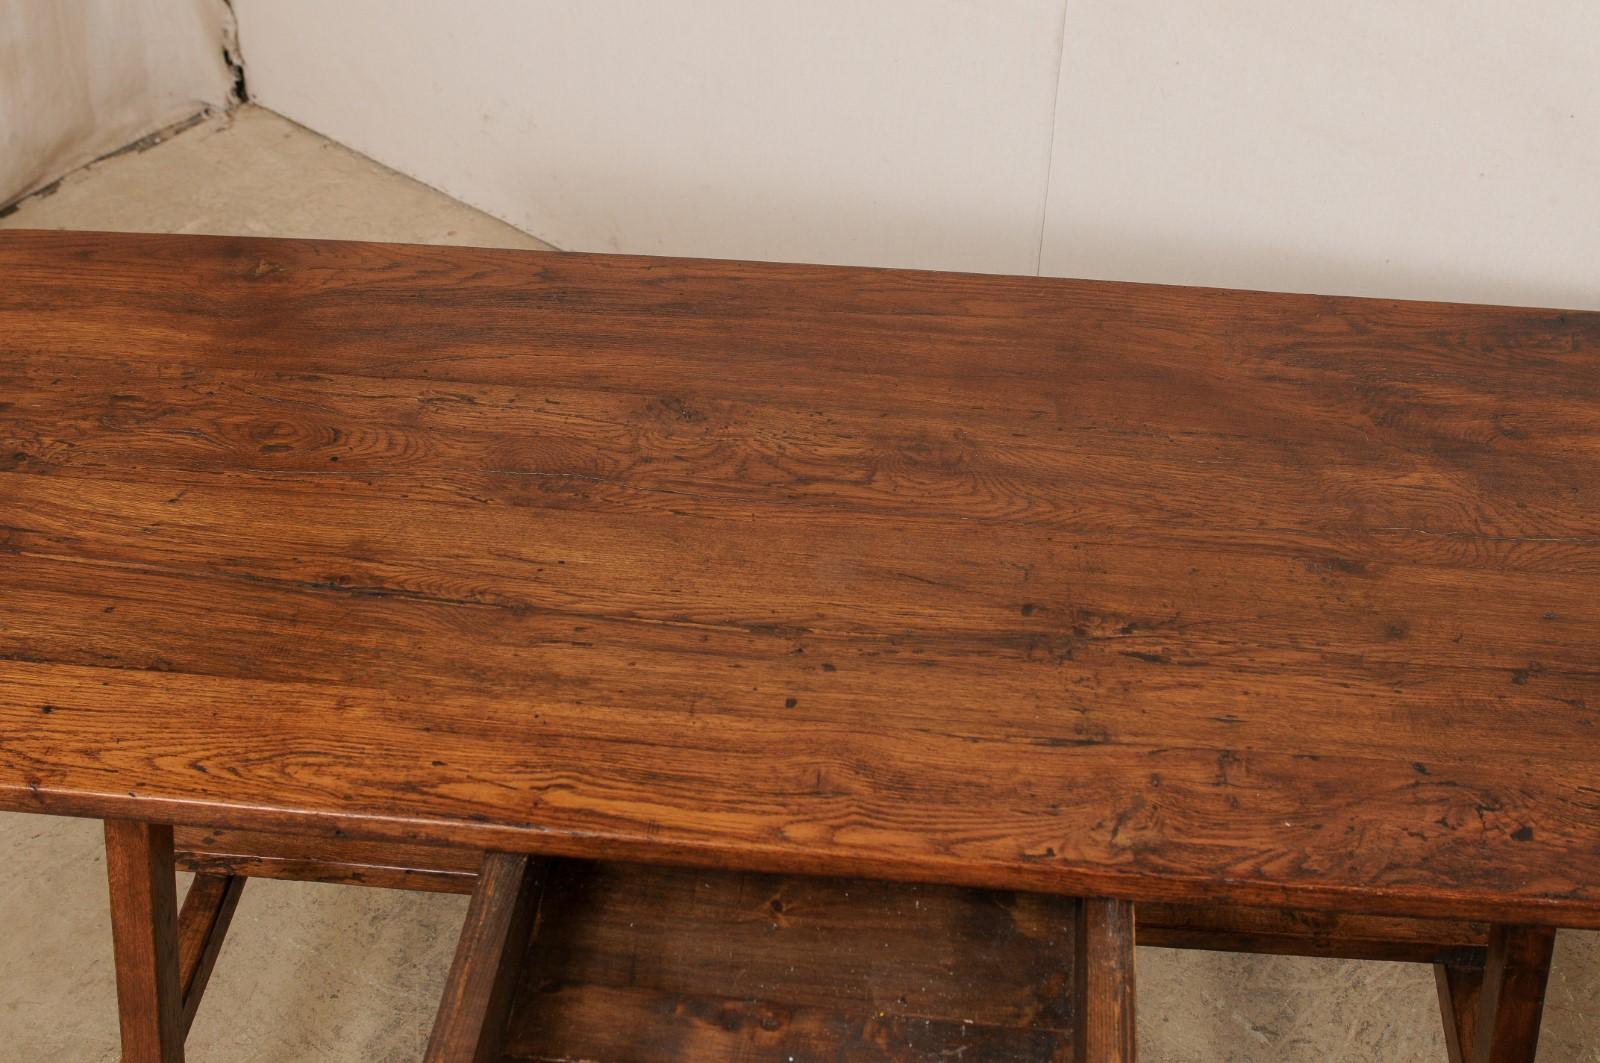 Wood Early 18th C. Italian Walnut Table with V-Stretcher, a Great Desk Option